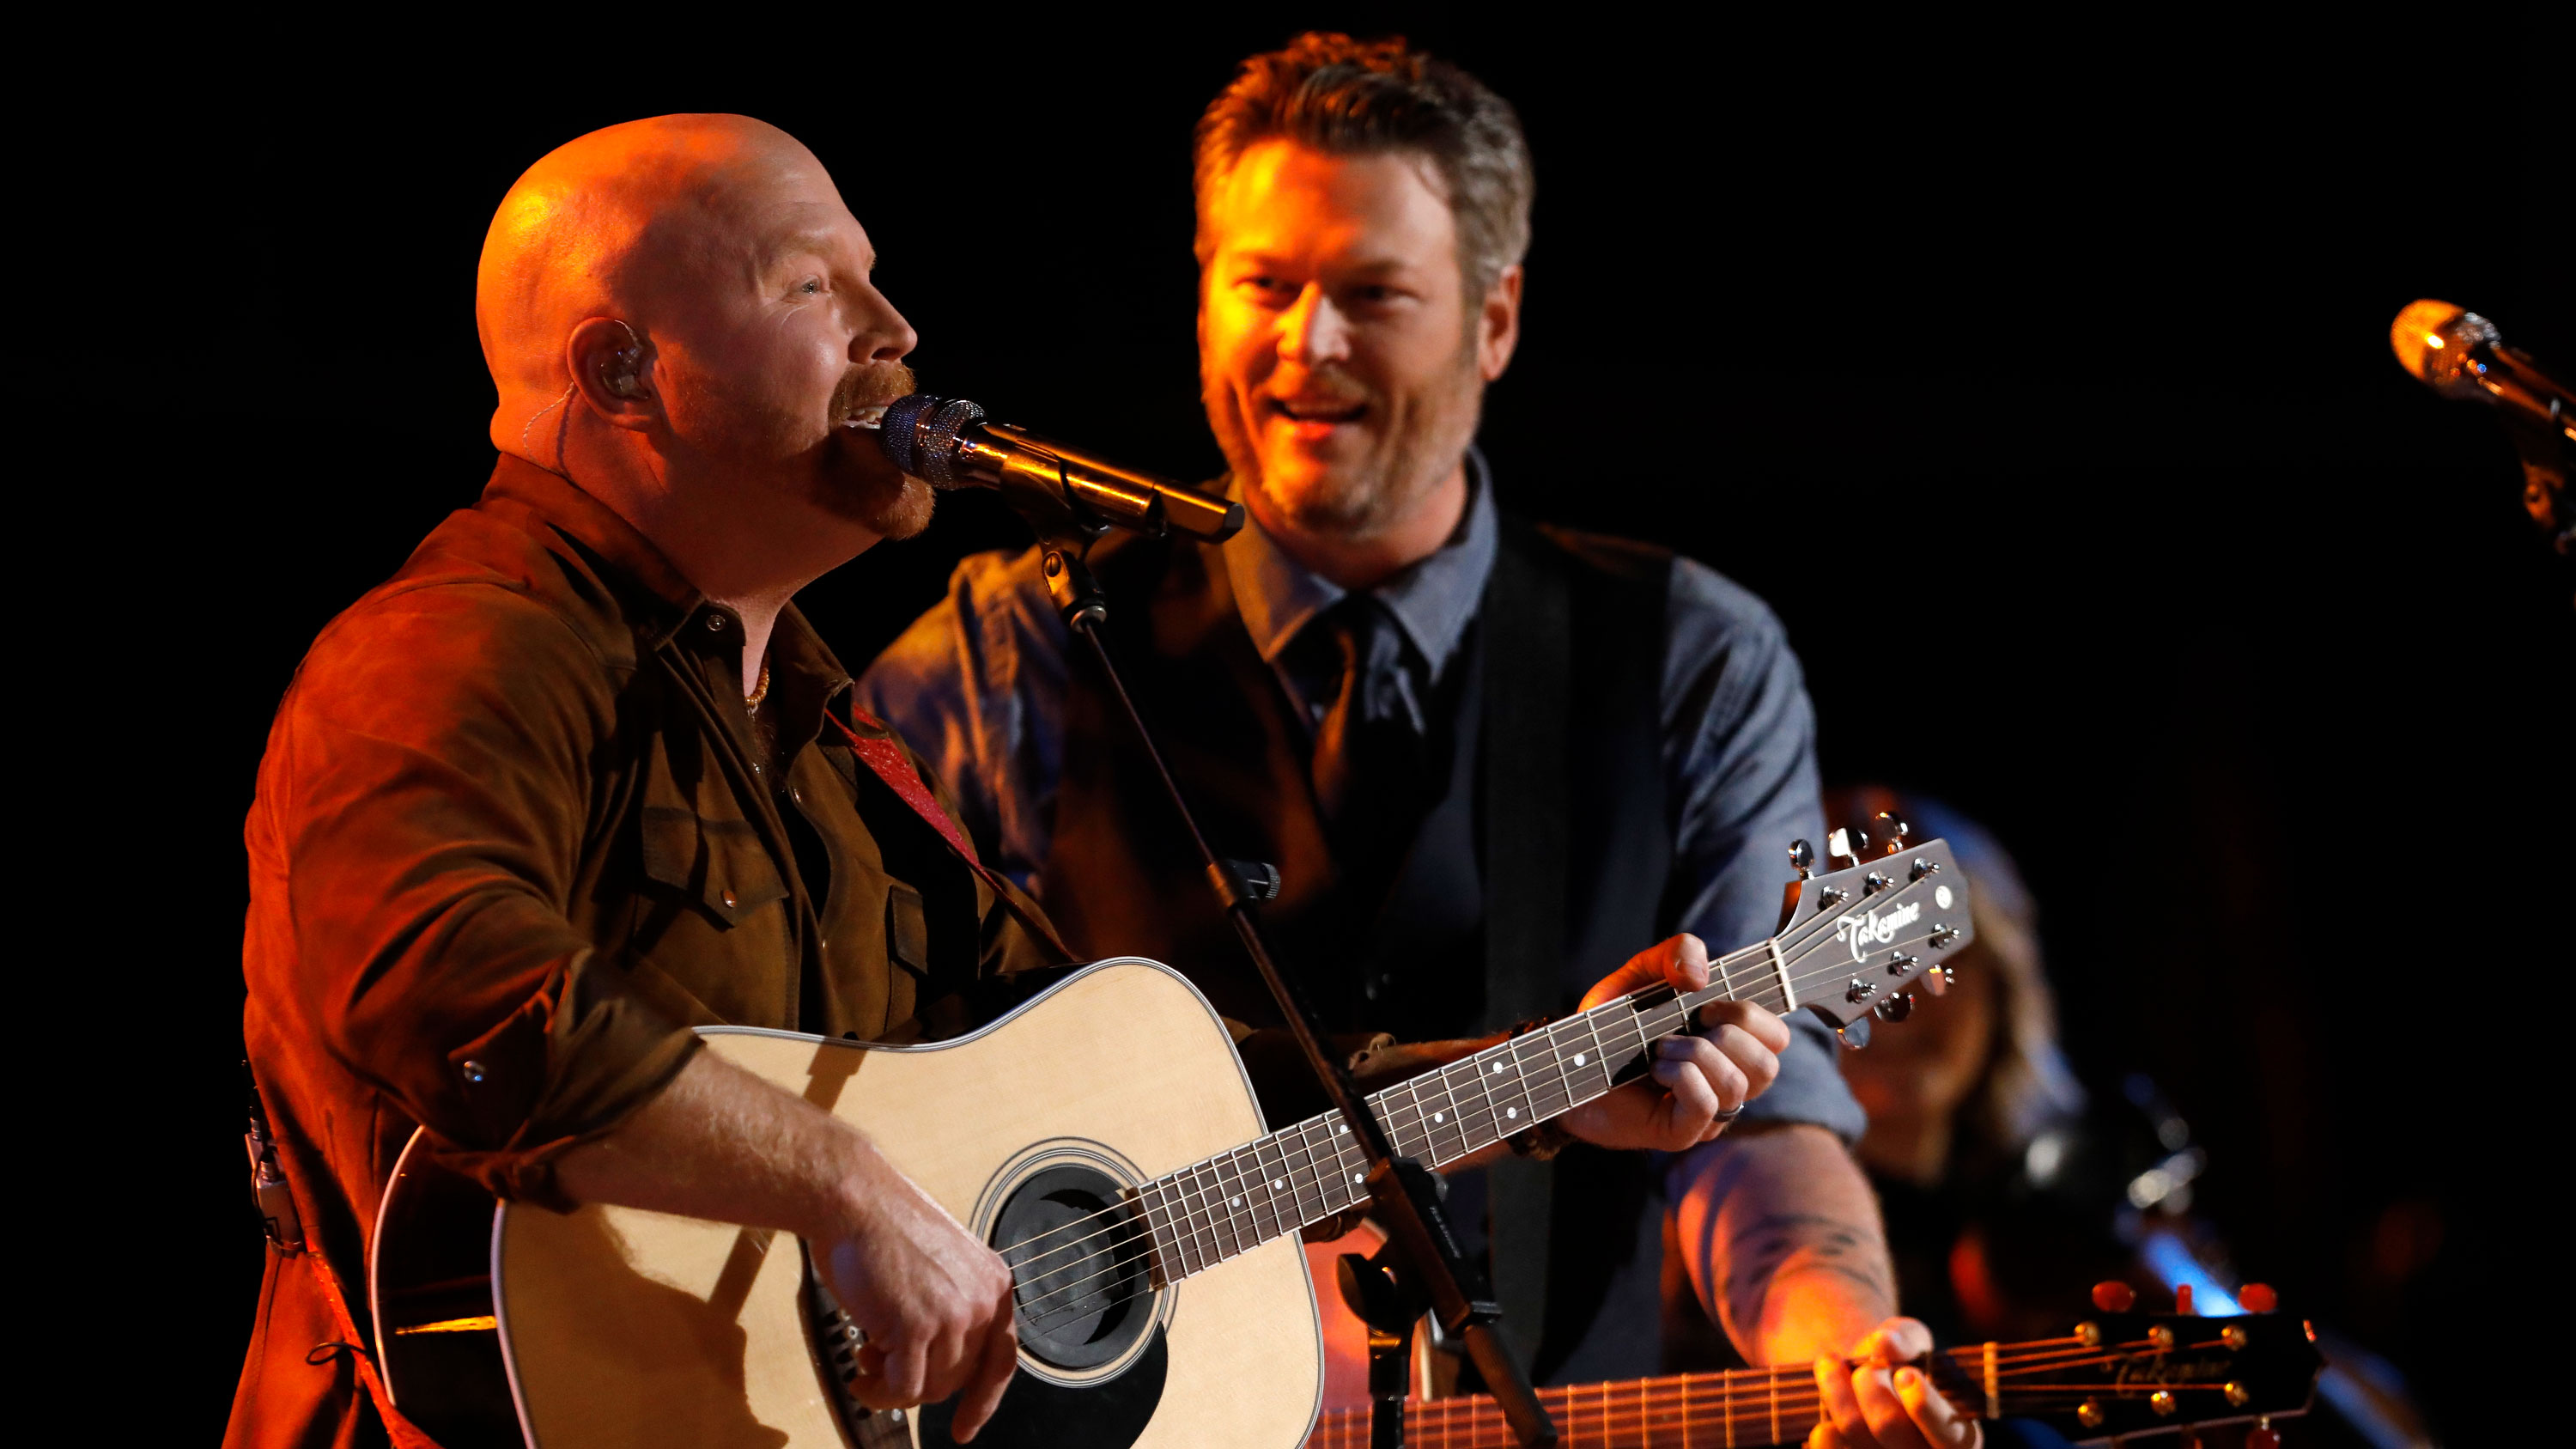 Watch The Voice Highlight: Red Marlow and Blake Shelton: "I'm Gonna Miss Fishin' Song)" -